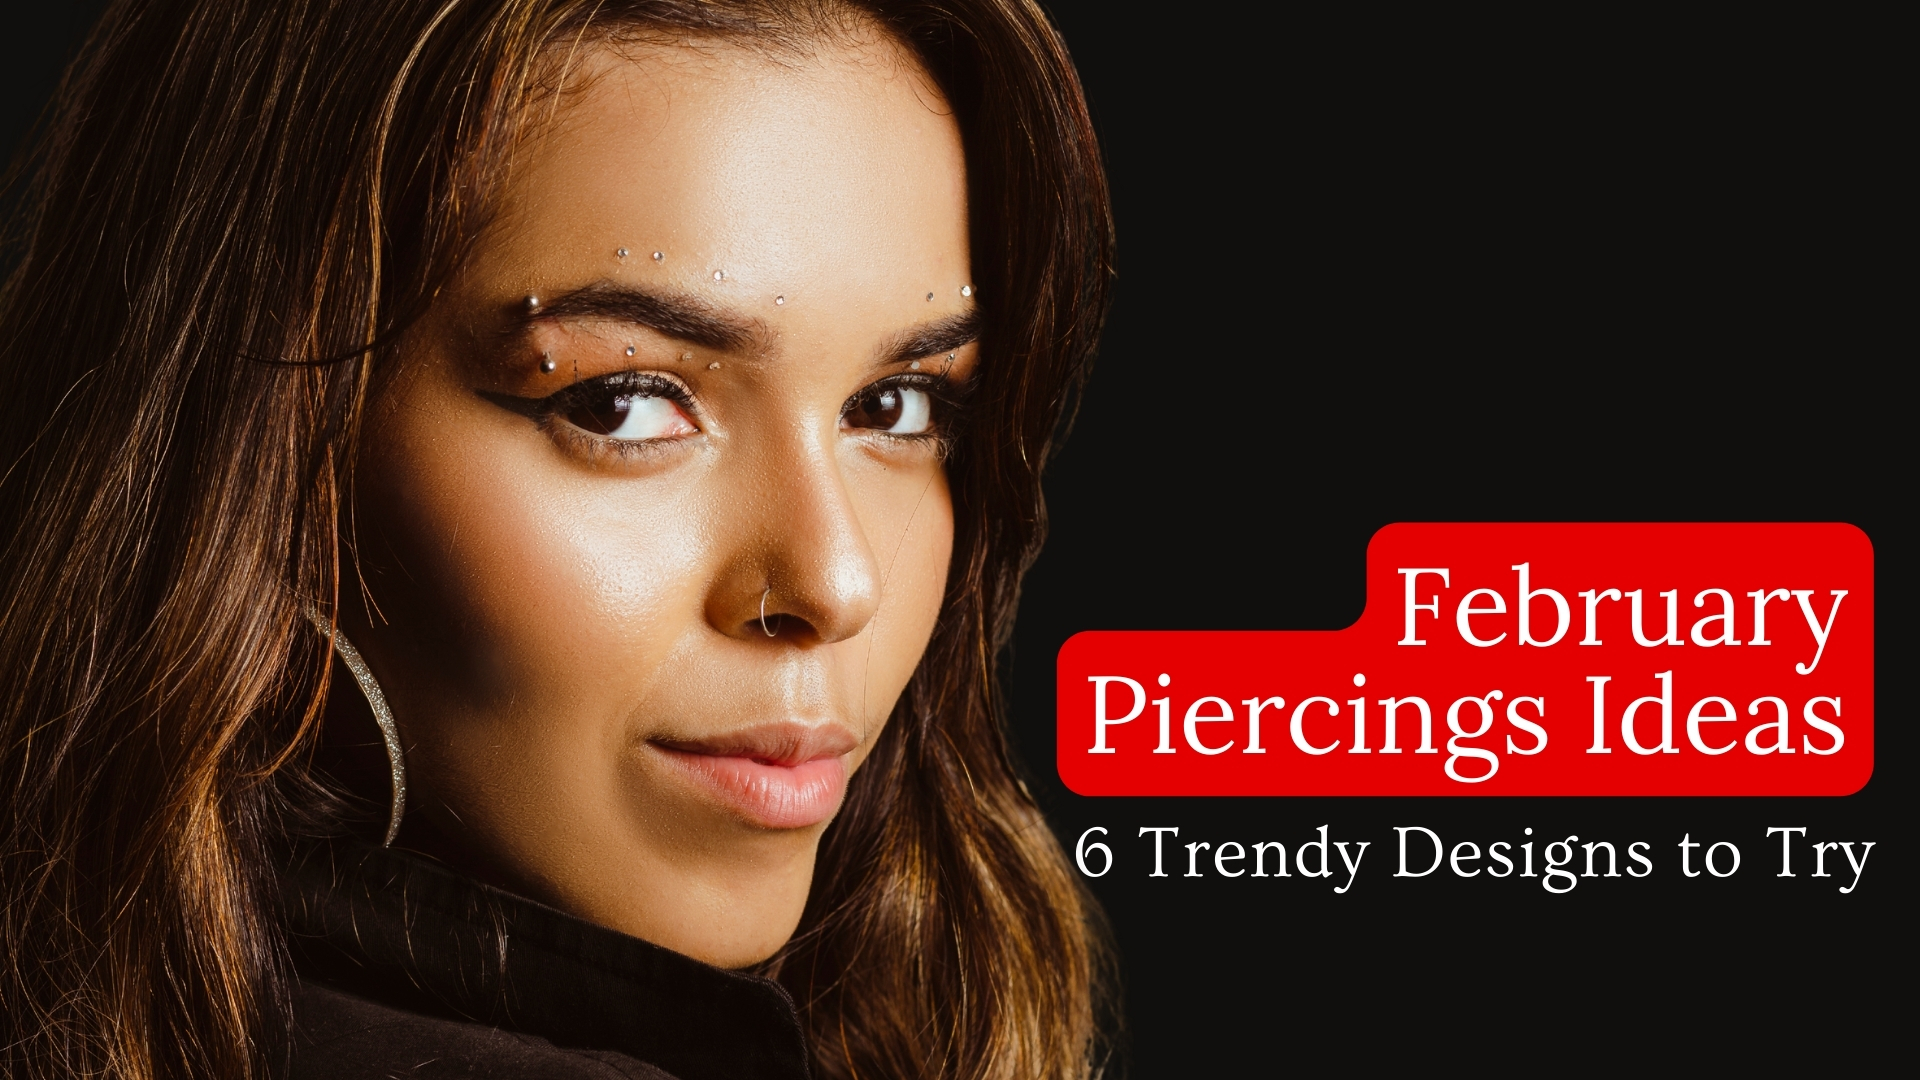 6 Trendy Piercing Designs to Try in this February